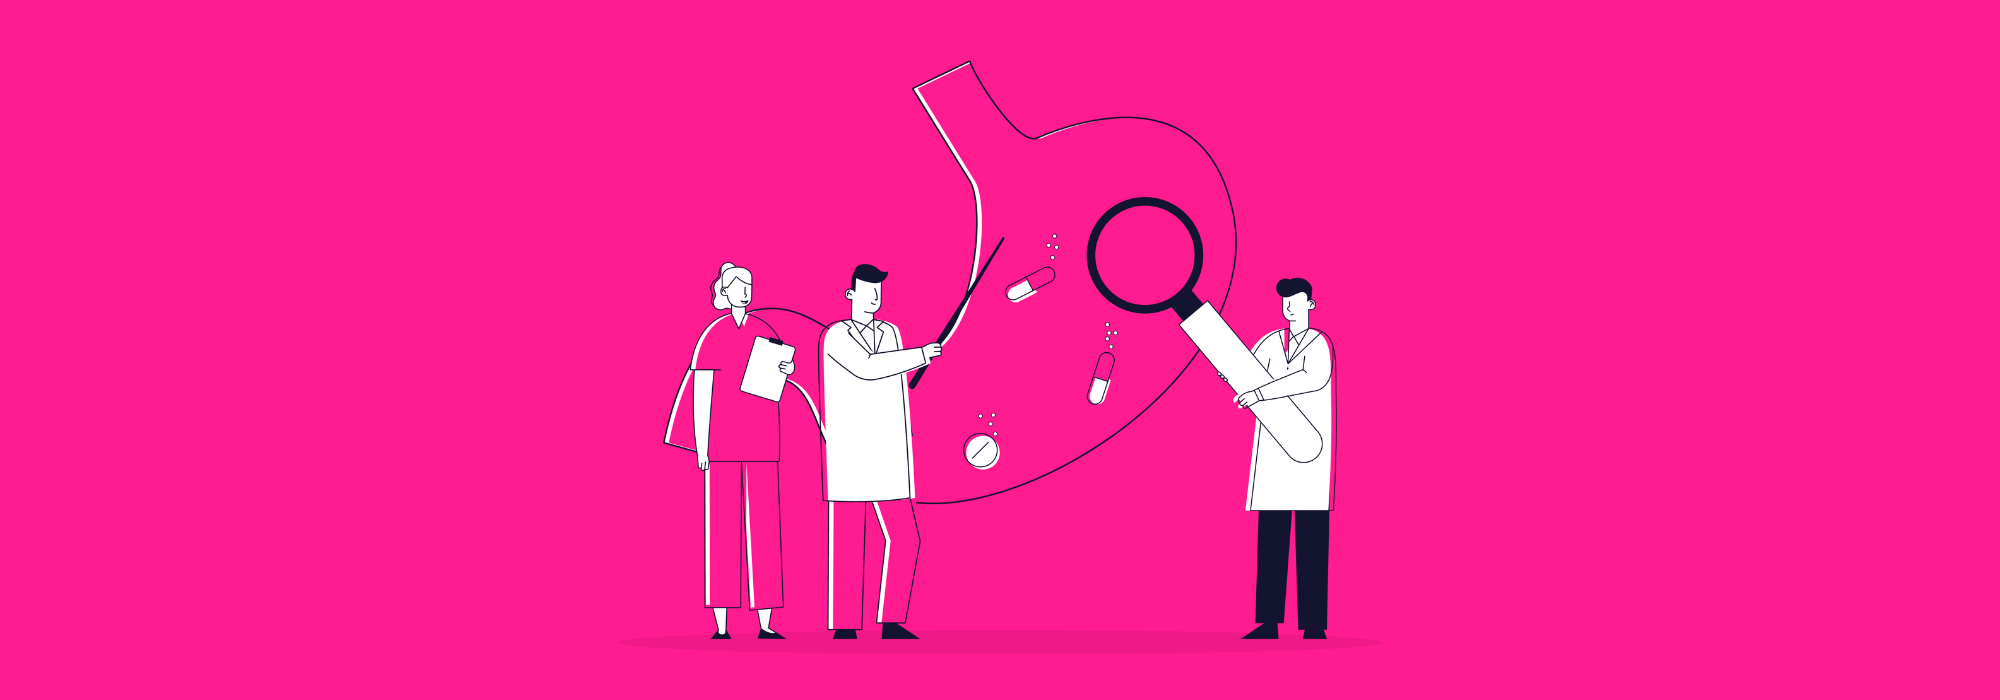 Data science and the personalised medicine revolution